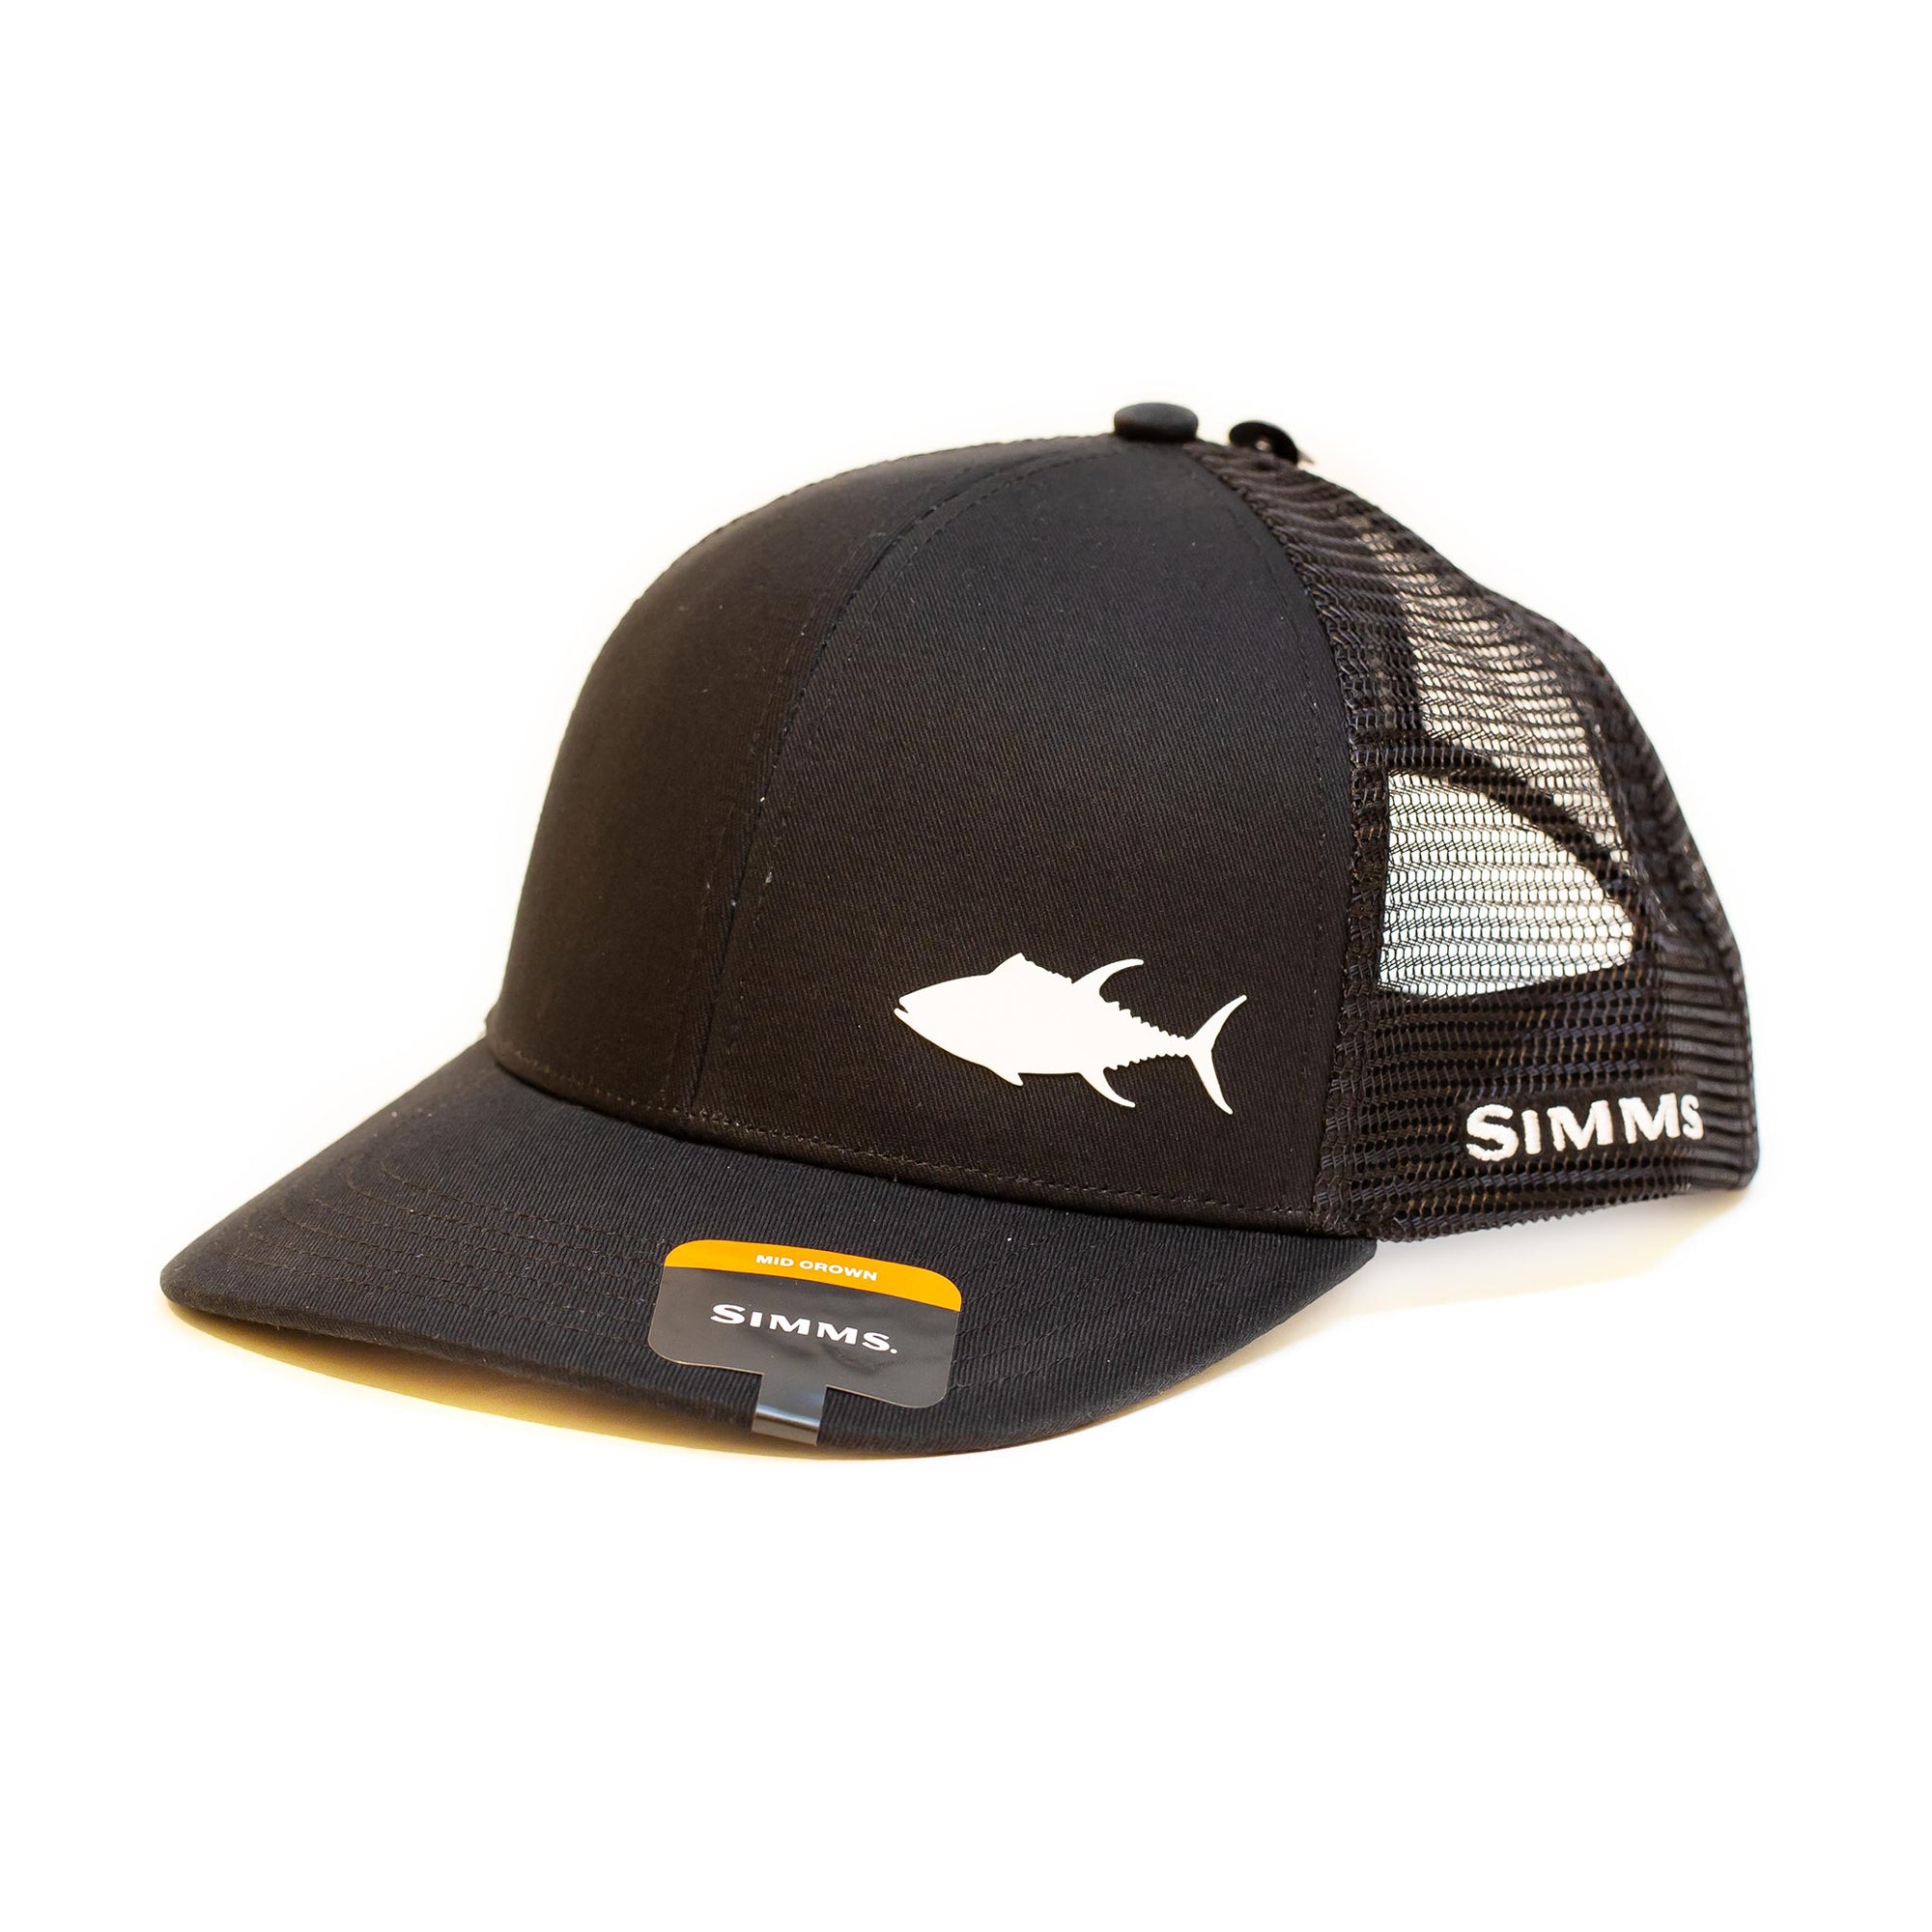 Simms Payoff Trucker Tuna Black Cap - Compleat Angler Nedlands